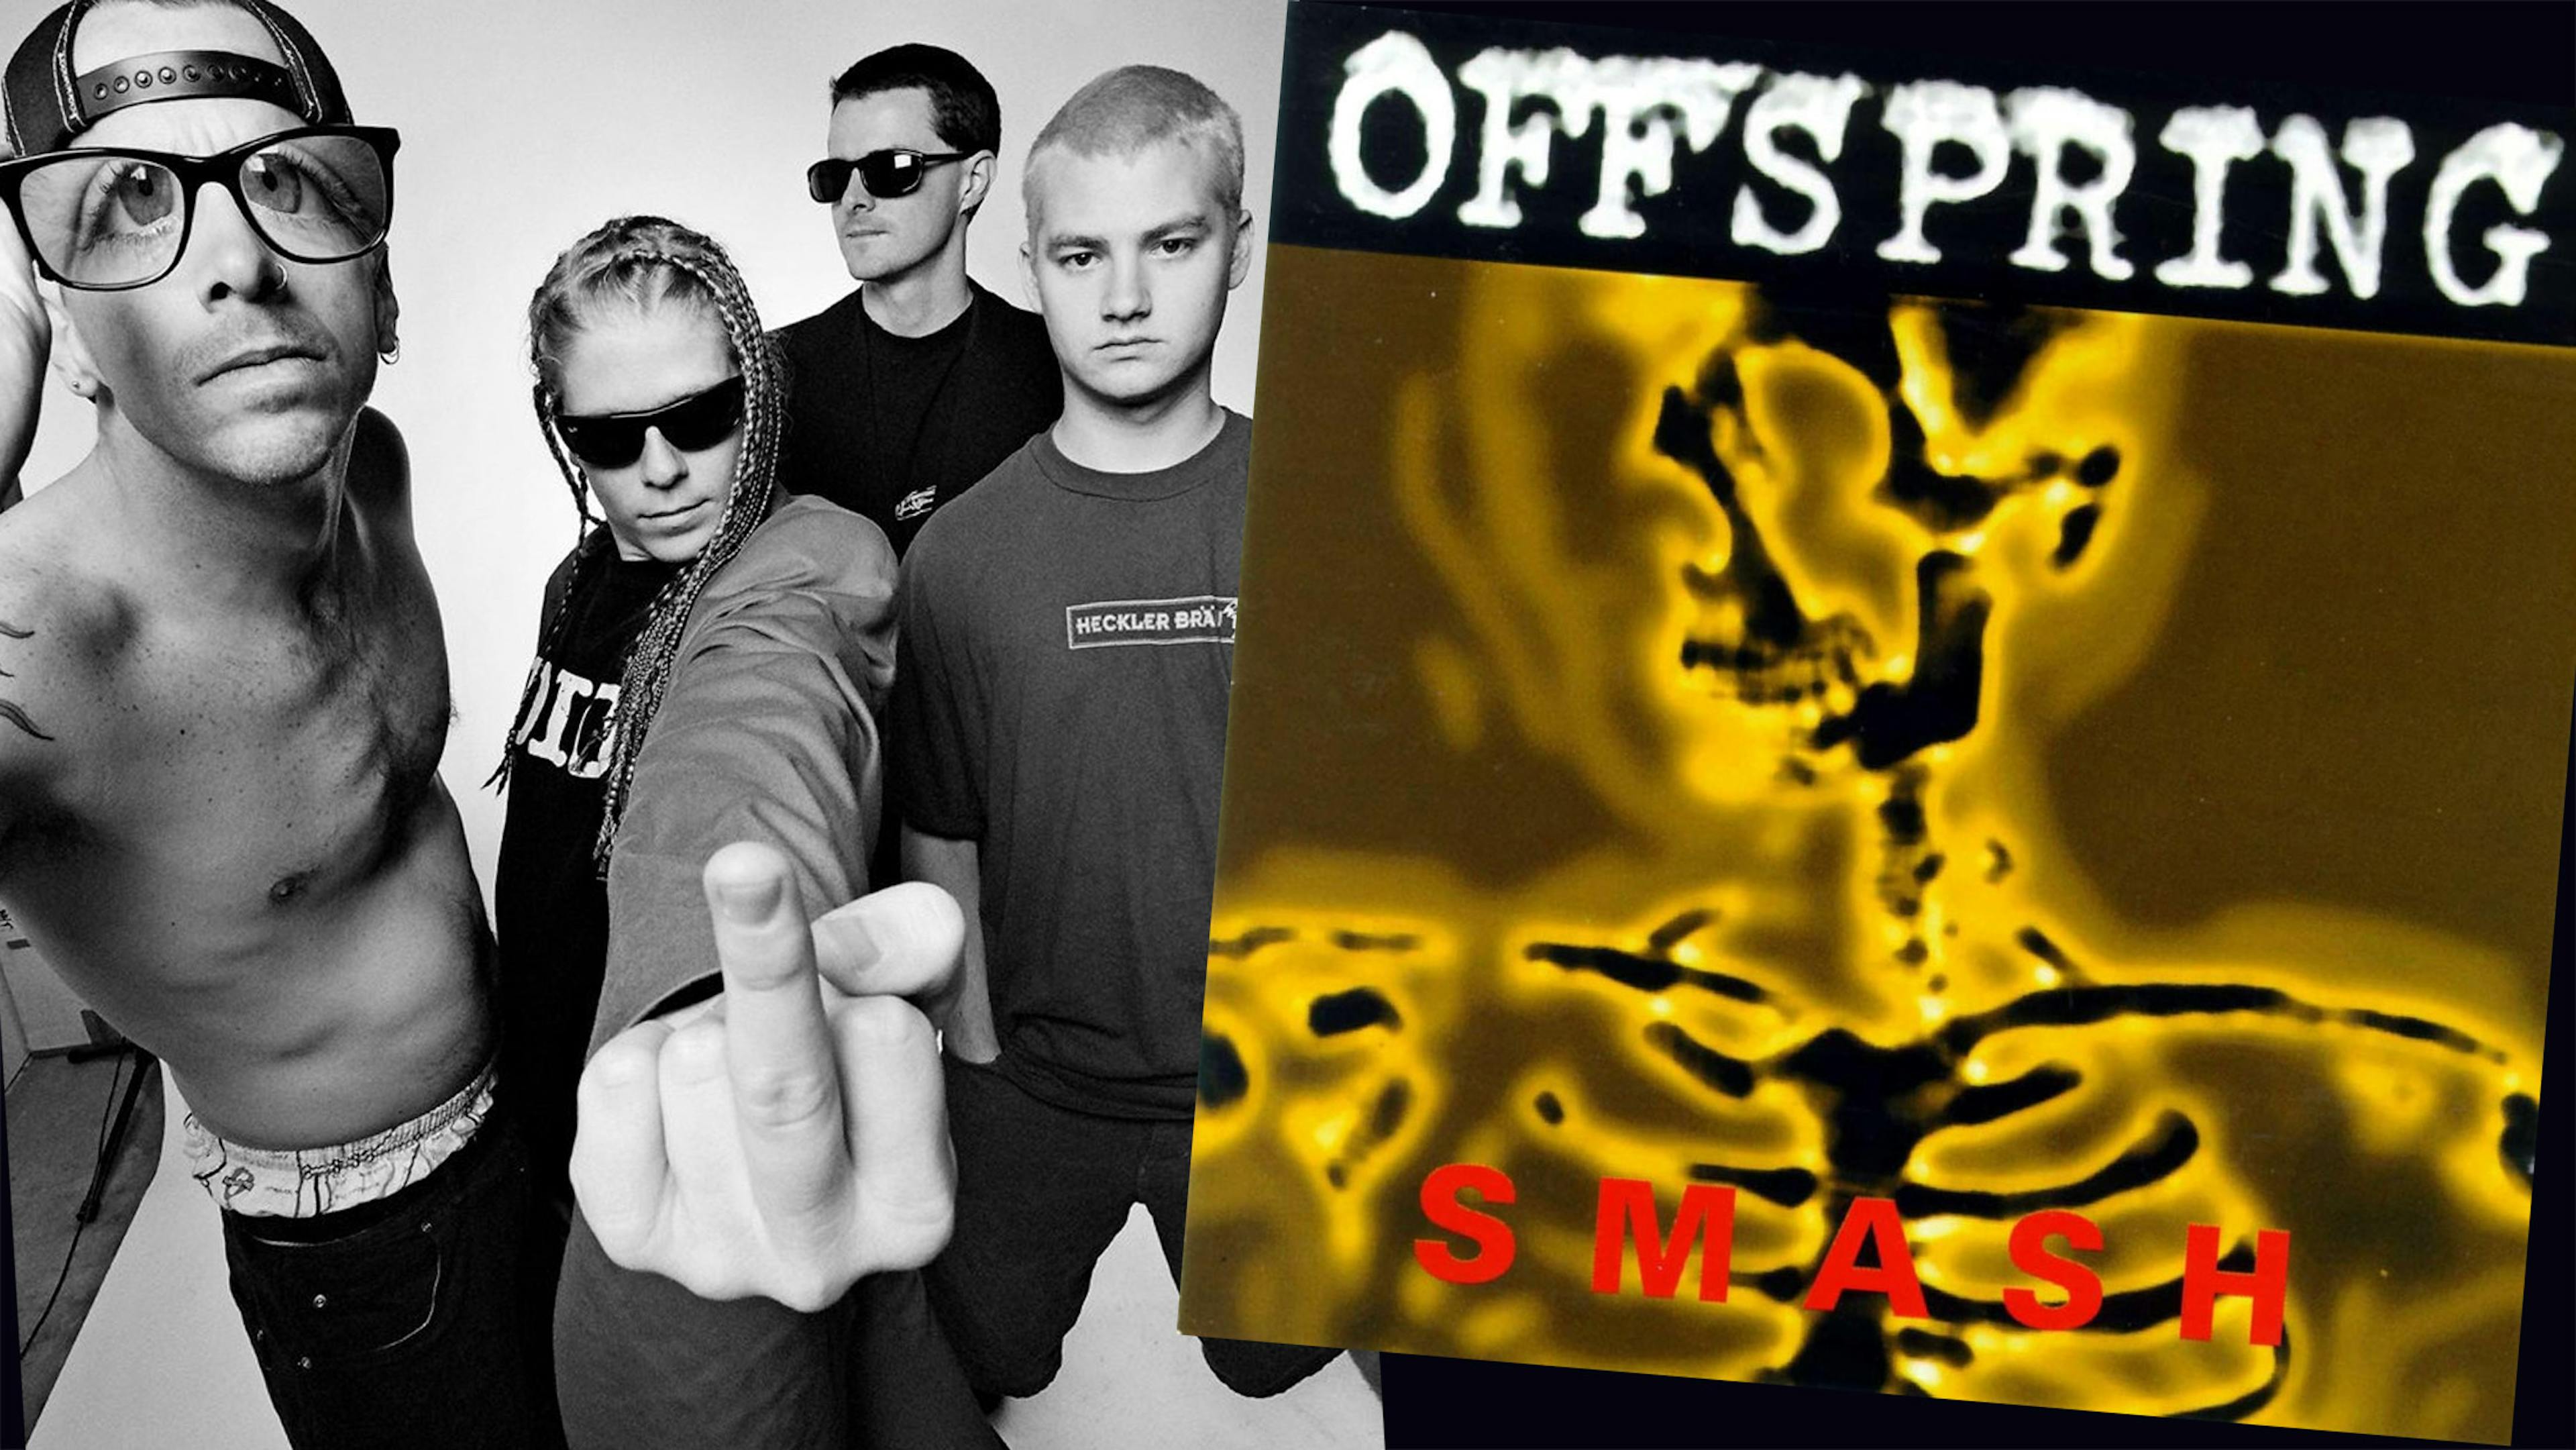 How The Offspring’s Smash changed American punk forever